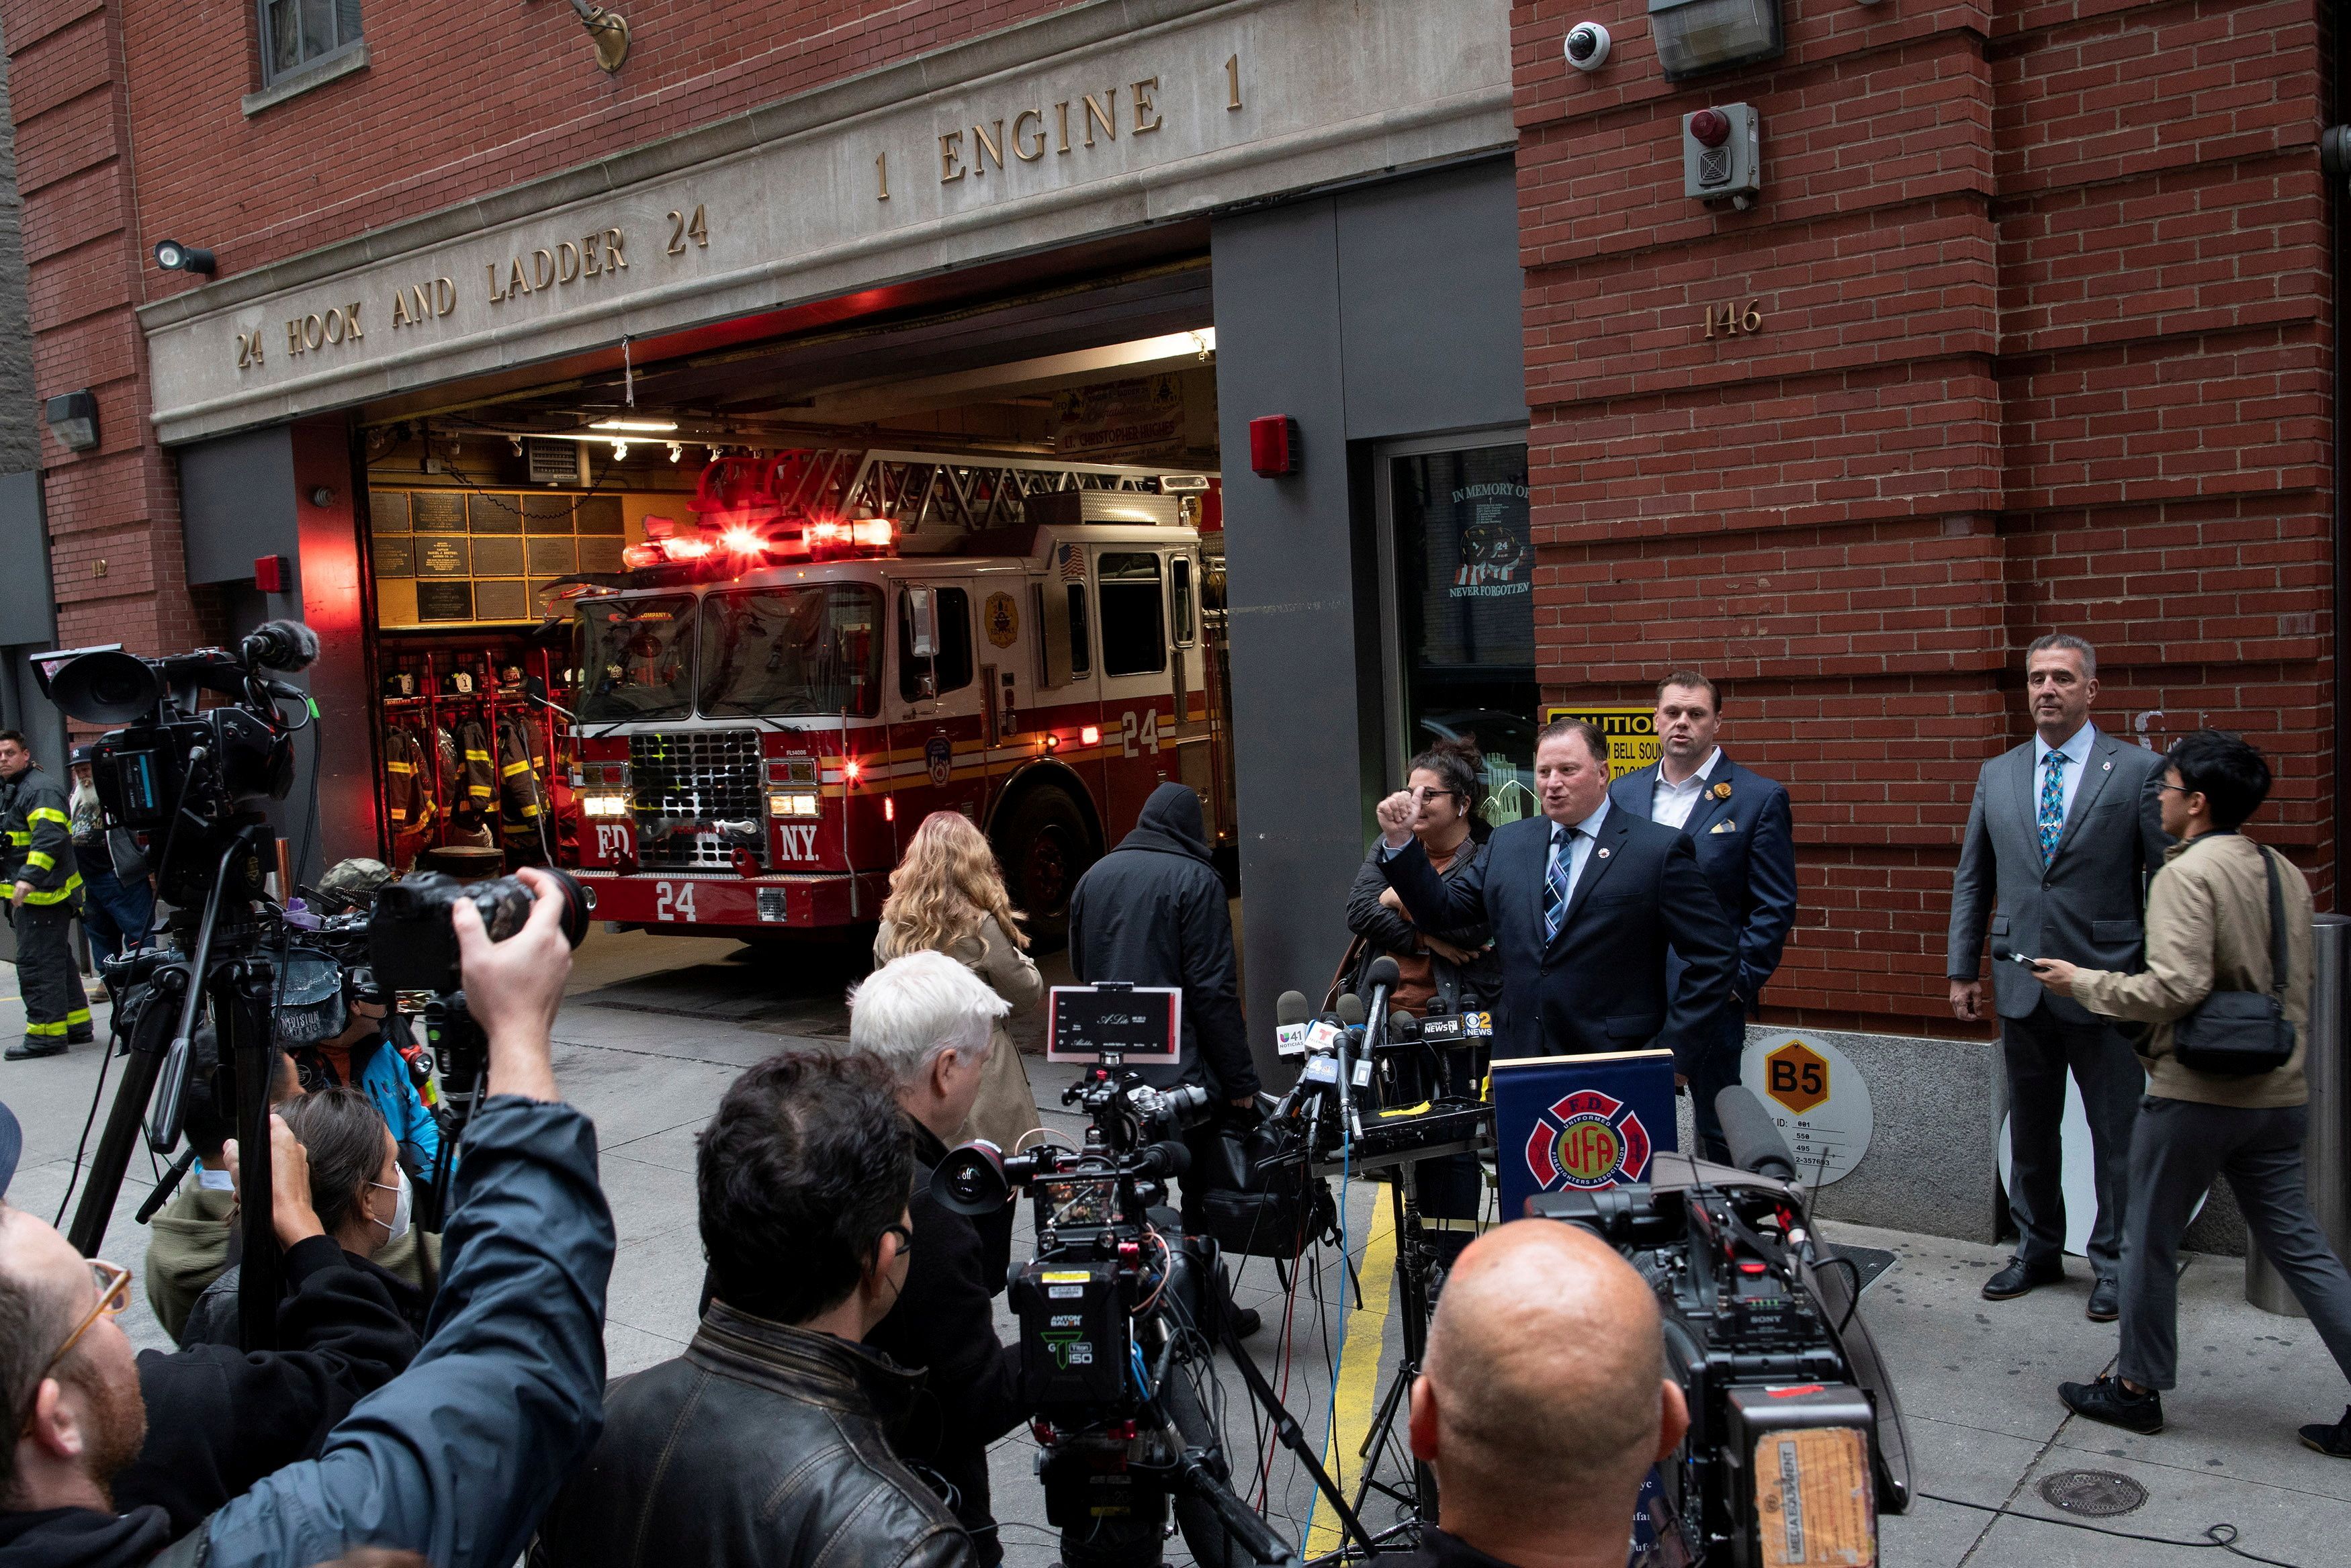 New York City Fire Department (FDNY) Uniformed Firefighters Association (UFA) President Andrew Ansbro speaks while a NYFD truck exit the building during a news conference as the city's COVID-19 vaccine mandate deadline approaches at Ladder Co. 24 in Manhattan, New York City, New York, U.S., October 29, 2021. REUTERS/Eduardo Munoz/File Photo